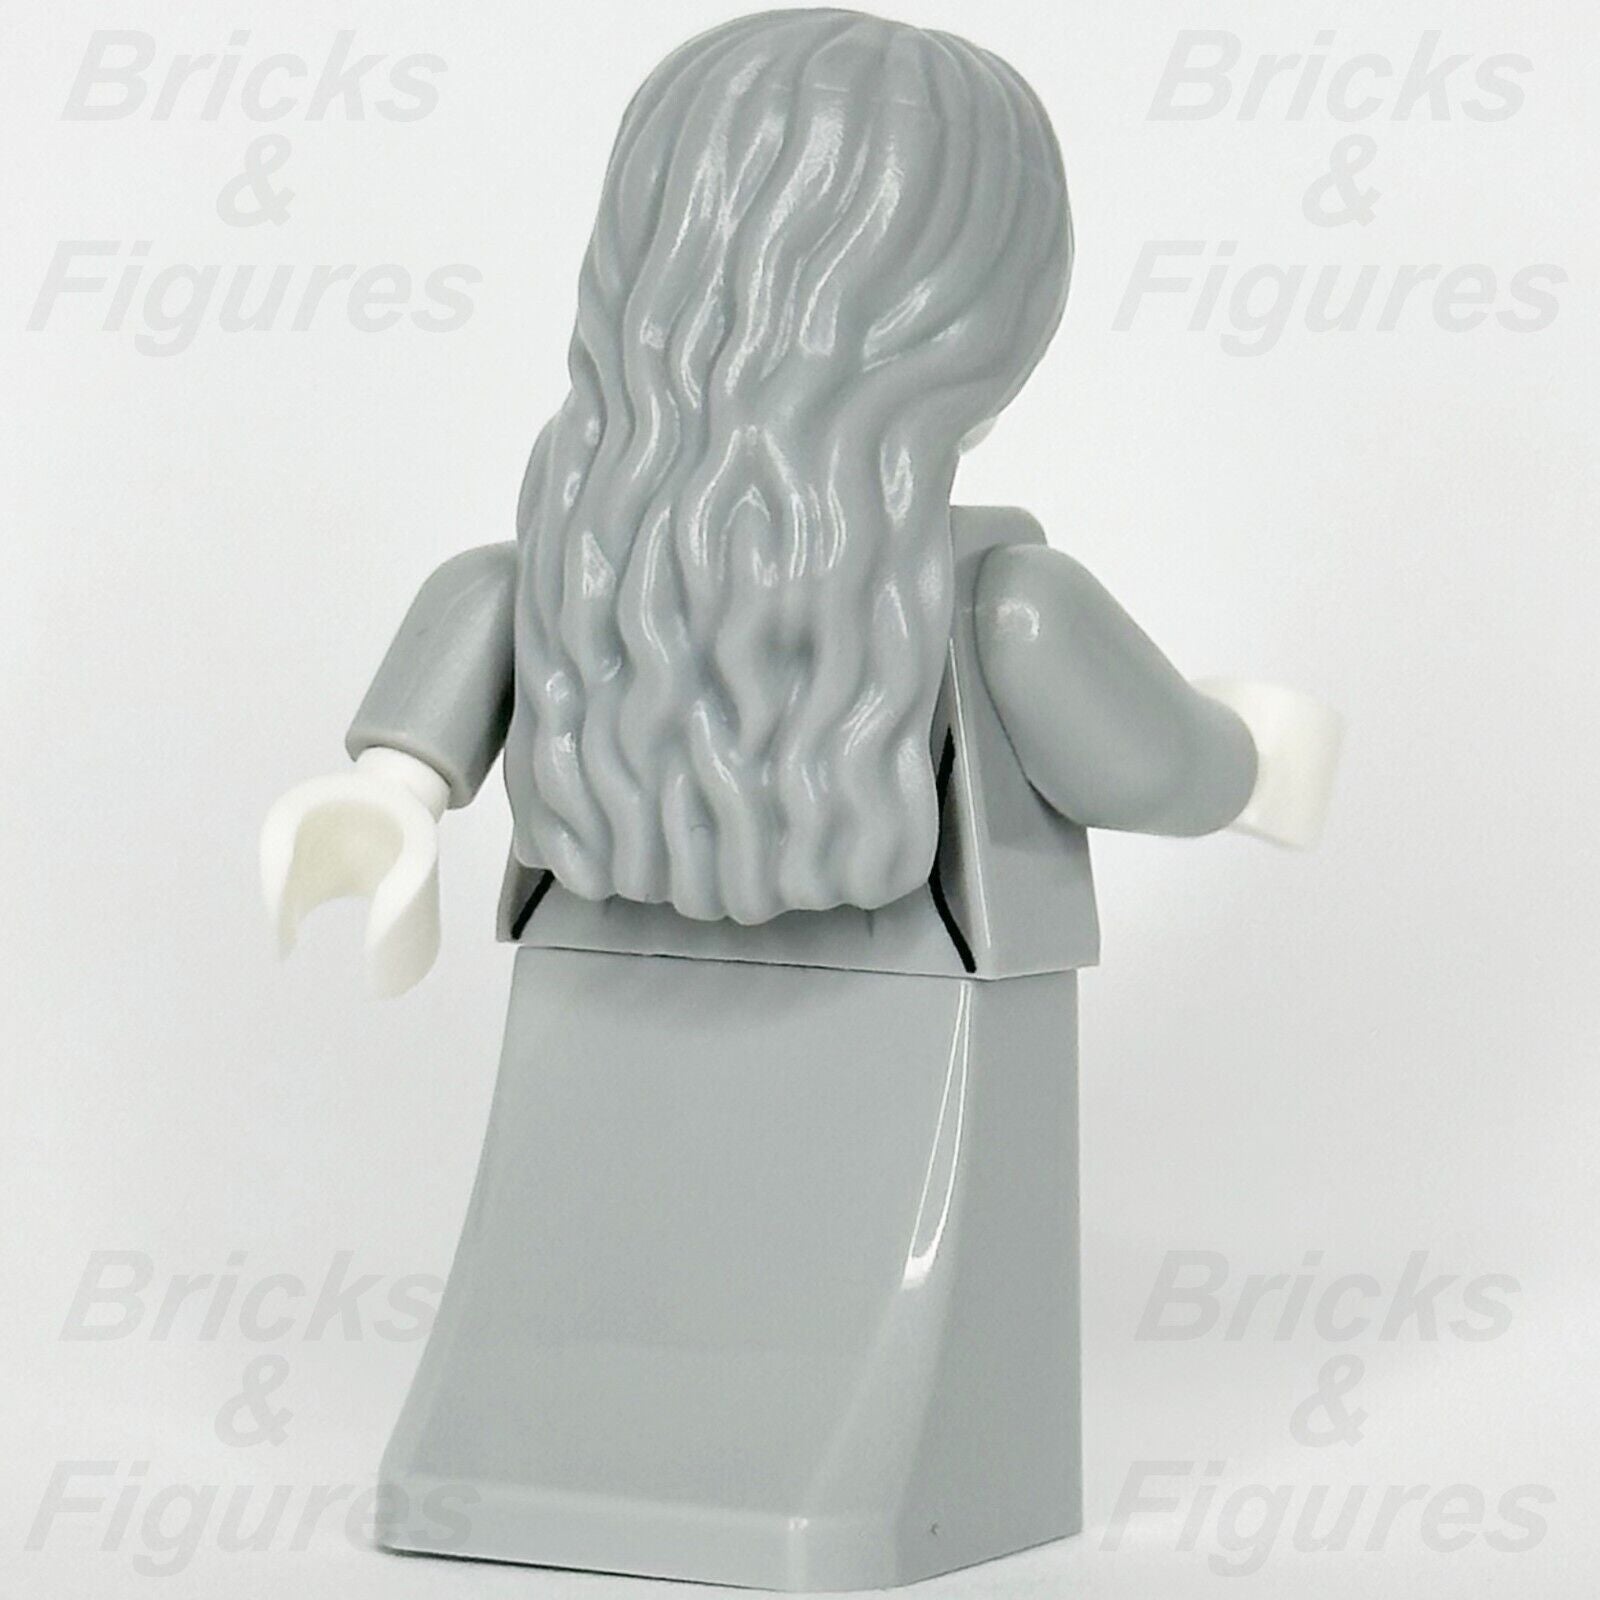 LEGO Harry Potter The Grey Lady Minifigure Deathly Hallows Witch 76413 hp411